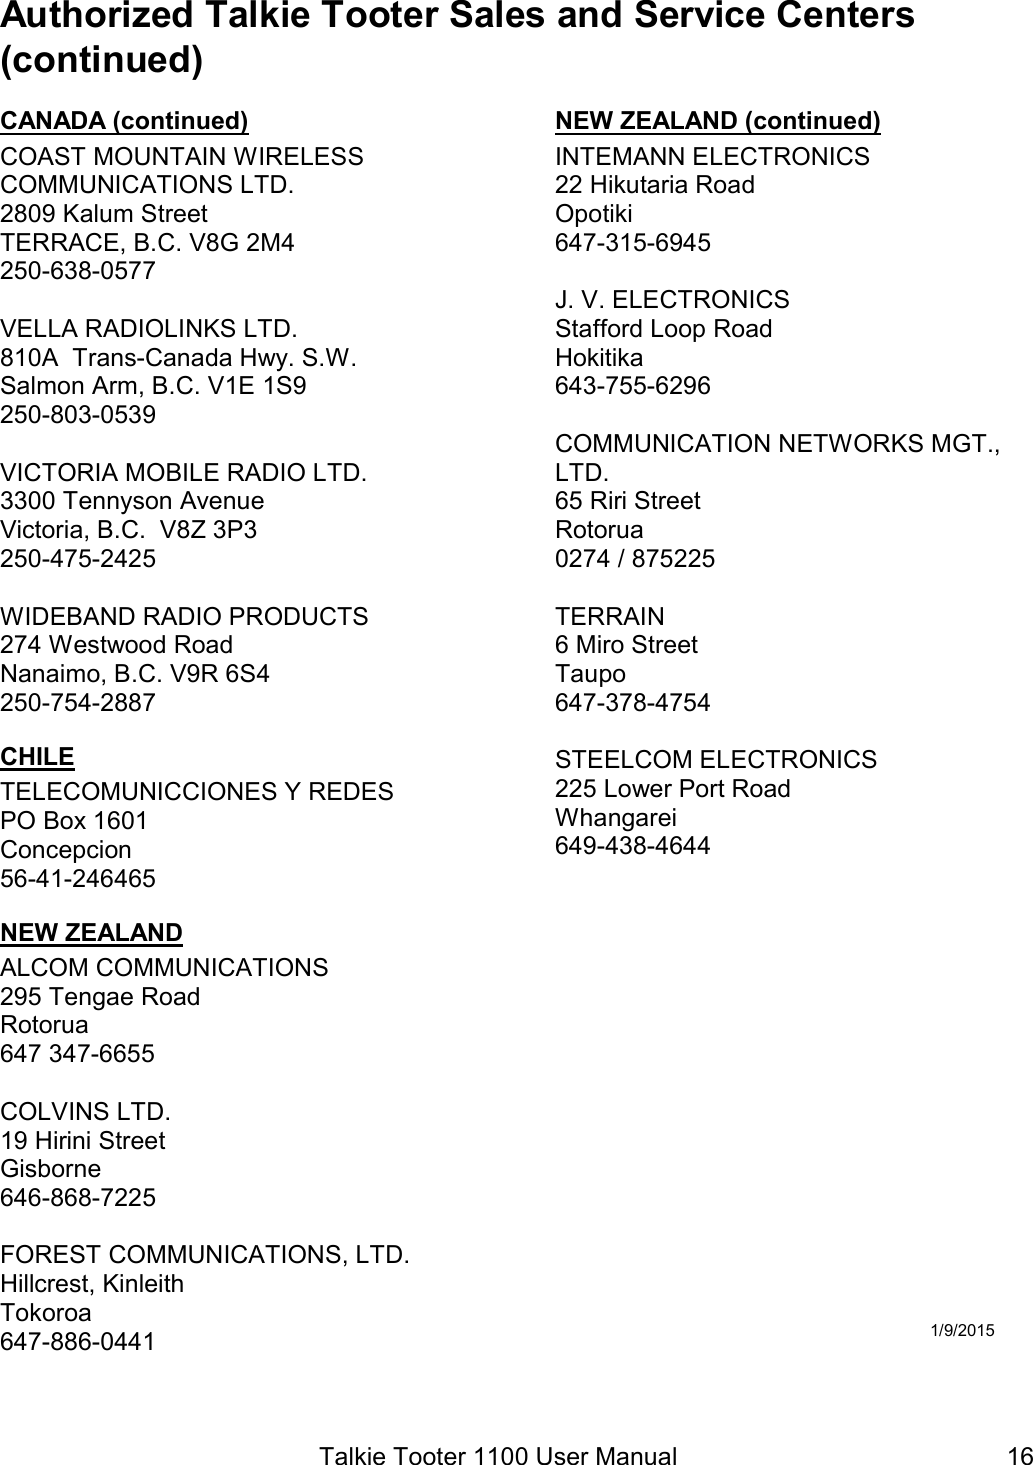 Talkie Tooter 1100 User Manual  16Authorized Talkie Tooter Sales and Service Centers (continued)CANADA (continued) COAST MOUNTAIN WIRELESS COMMUNICATIONS LTD. 2809 Kalum Street TERRACE, B.C. V8G 2M4 250-638-0577  VELLA RADIOLINKS LTD. 810A  Trans-Canada Hwy. S.W. Salmon Arm, B.C. V1E 1S9 250-803-0539  VICTORIA MOBILE RADIO LTD. 3300 Tennyson Avenue Victoria, B.C.  V8Z 3P3 250-475-2425  WIDEBAND RADIO PRODUCTS 274 Westwood Road Nanaimo, B.C. V9R 6S4 250-754-2887 CHILE TELECOMUNICCIONES Y REDES PO Box 1601  Concepcion 56-41-246465 NEW ZEALAND ALCOM COMMUNICATIONS 295 Tengae Road Rotorua 647 347-6655  COLVINS LTD. 19 Hirini Street Gisborne 646-868-7225  FOREST COMMUNICATIONS, LTD. Hillcrest, Kinleith Tokoroa 647-886-0441  NEW ZEALAND (continued) INTEMANN ELECTRONICS 22 Hikutaria Road Opotiki 647-315-6945  J. V. ELECTRONICS Stafford Loop Road Hokitika 643-755-6296  COMMUNICATION NETWORKS MGT., LTD. 65 Riri Street Rotorua 0274 / 875225  TERRAIN 6 Miro Street Taupo 647-378-4754  STEELCOM ELECTRONICS 225 Lower Port Road Whangarei 649-438-4644                 1/9/2015 